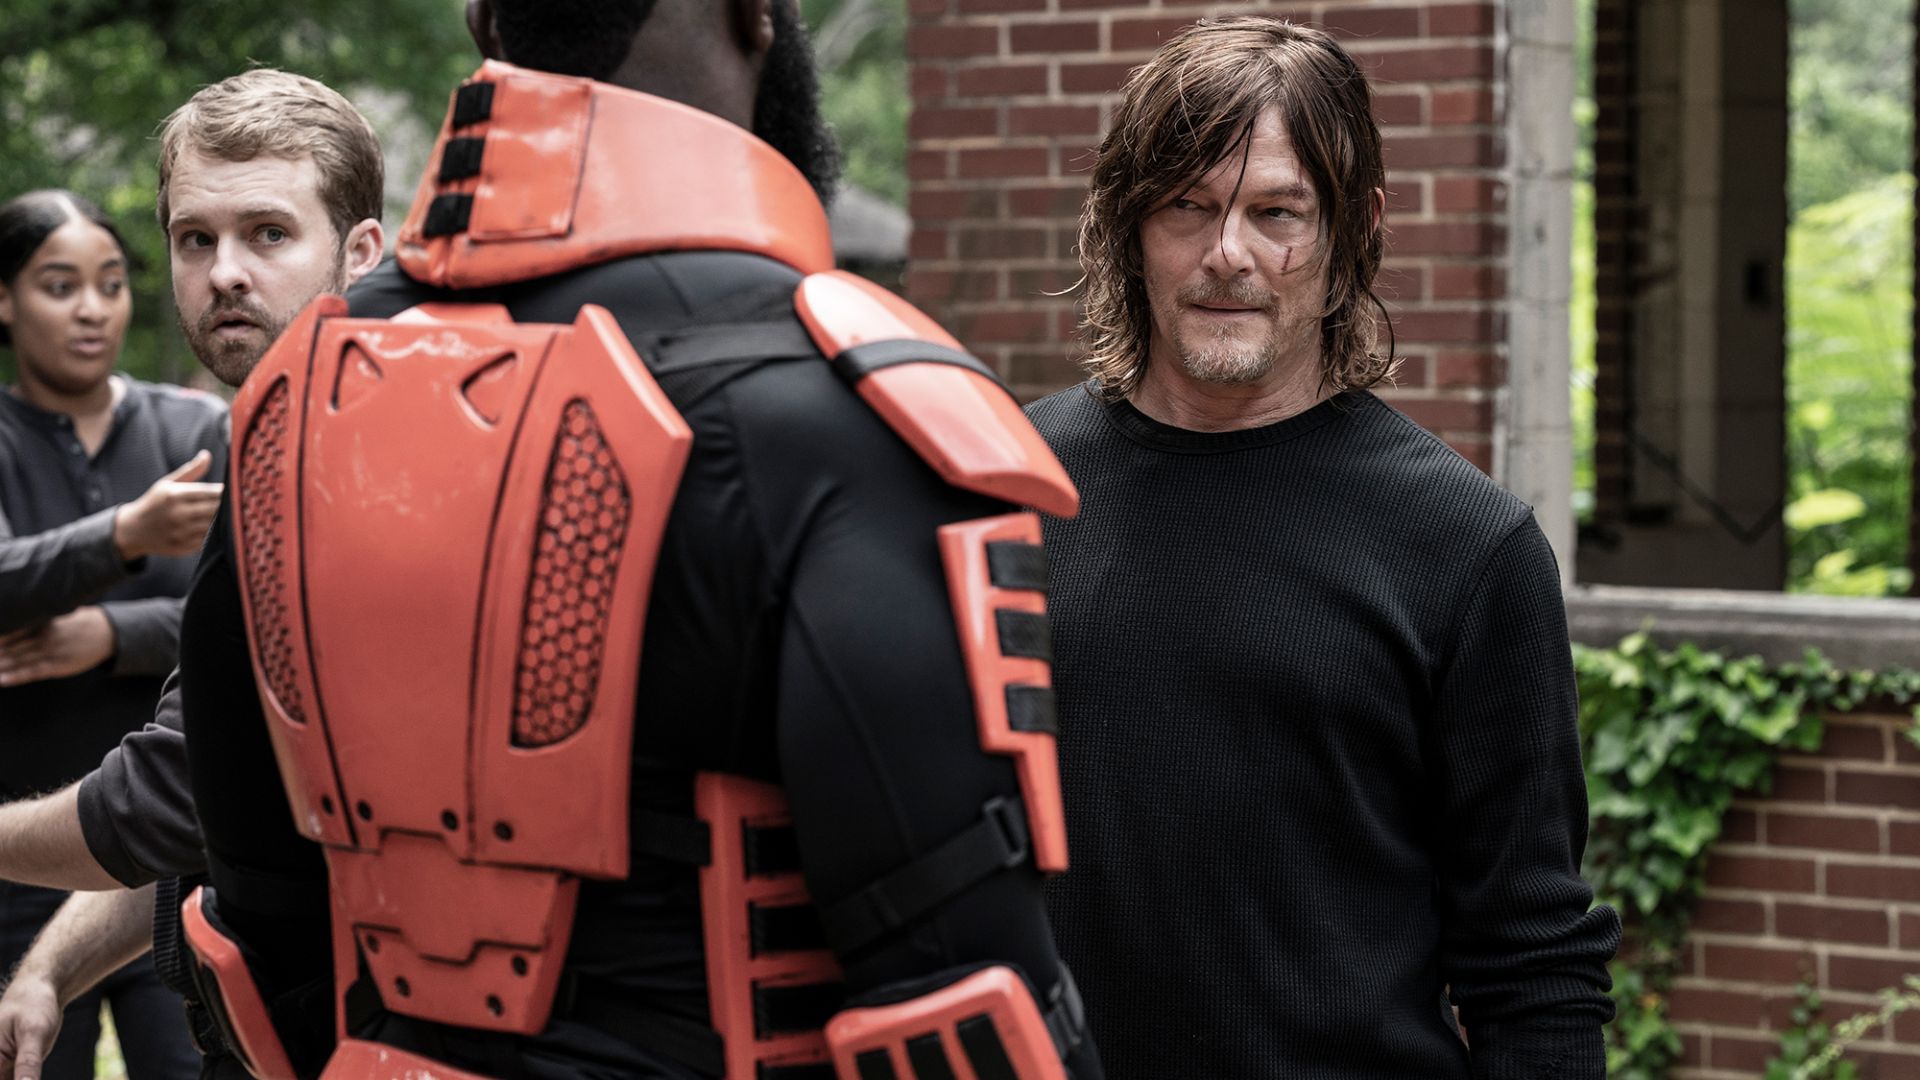 The Walking Dead’s Norman Reedus opens up about “exhausting” final season, and teases Daryl spin-off